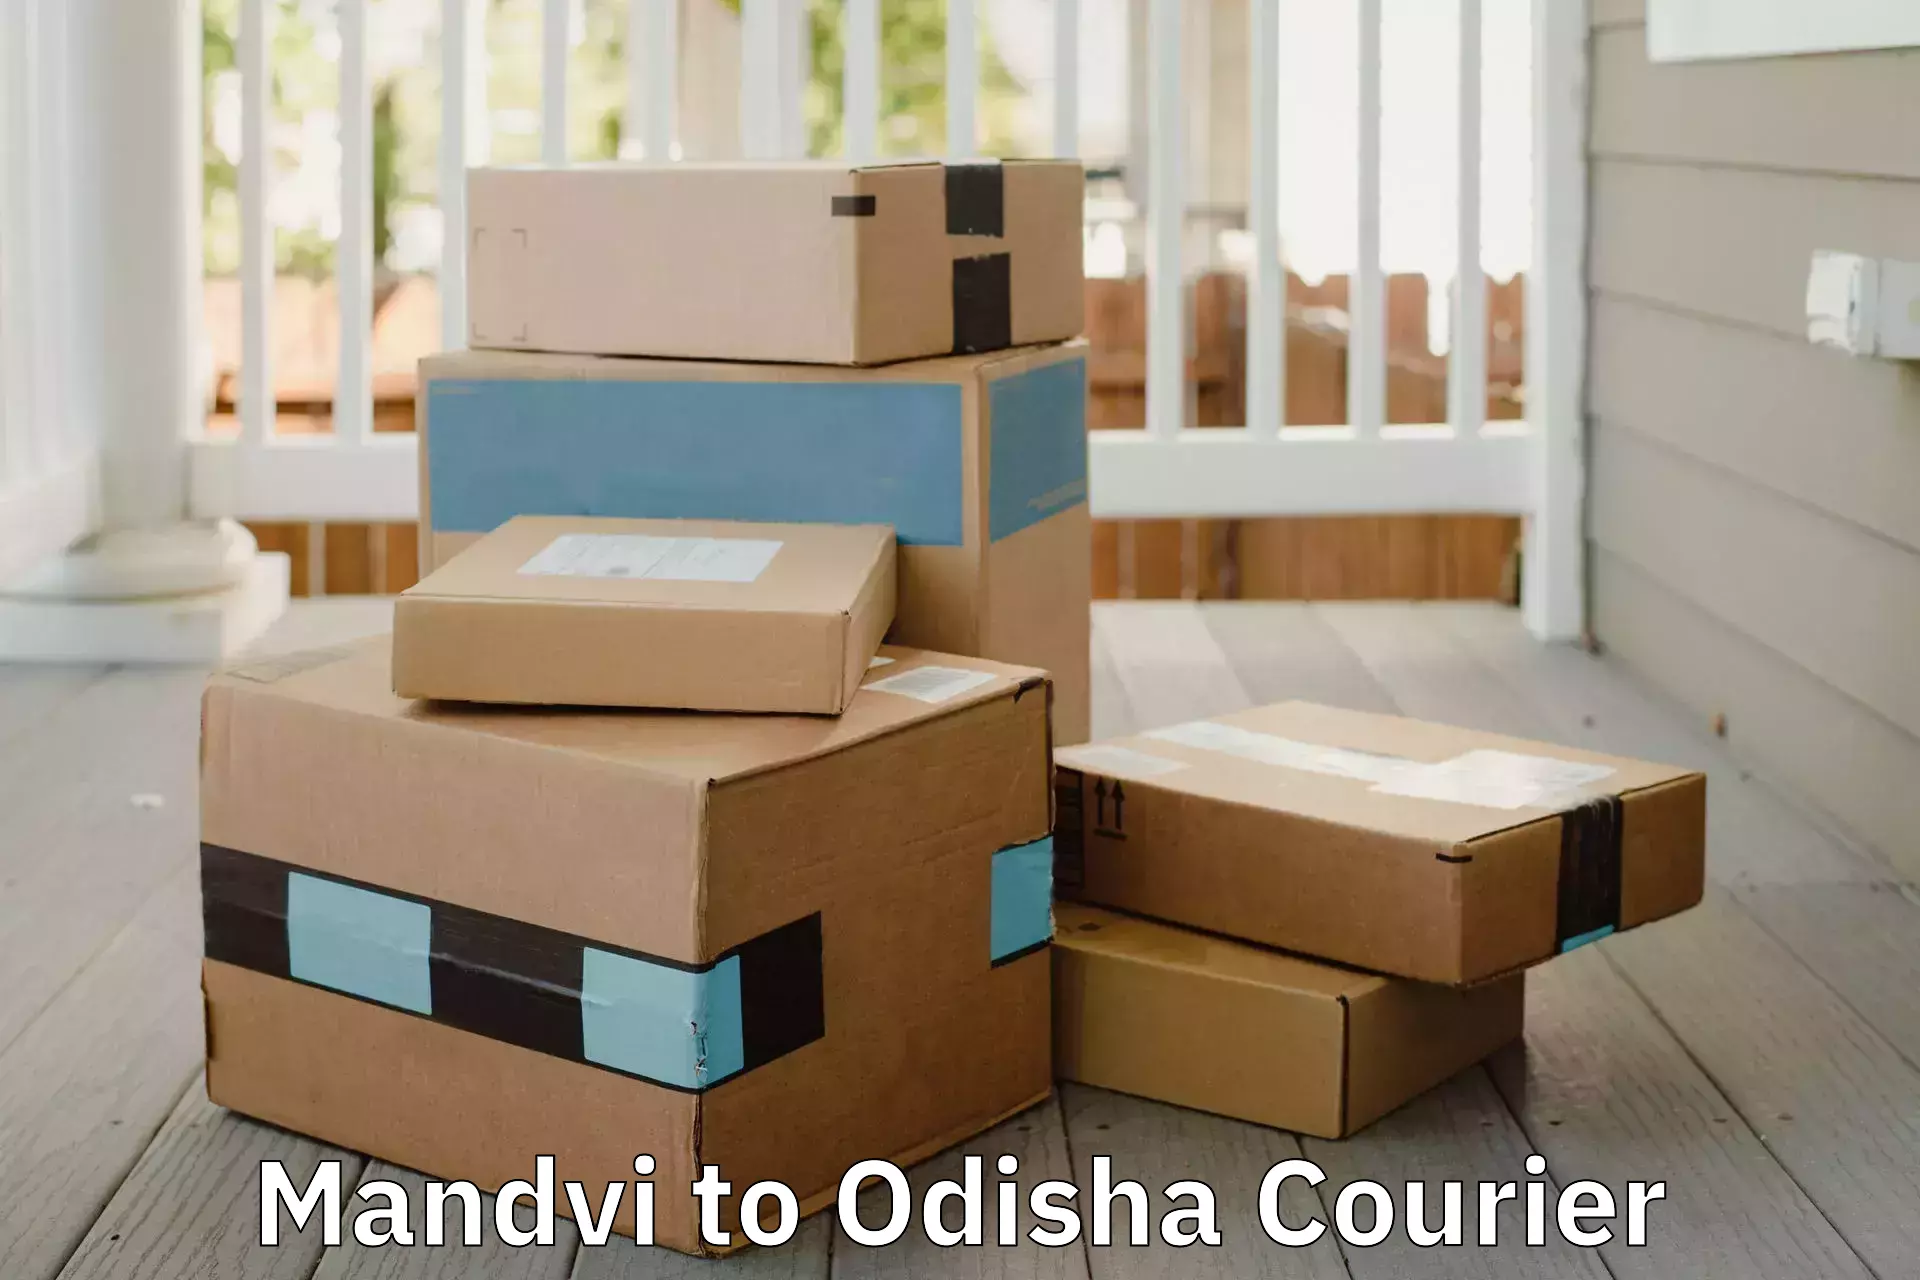 Budget-friendly movers Mandvi to Anandapur